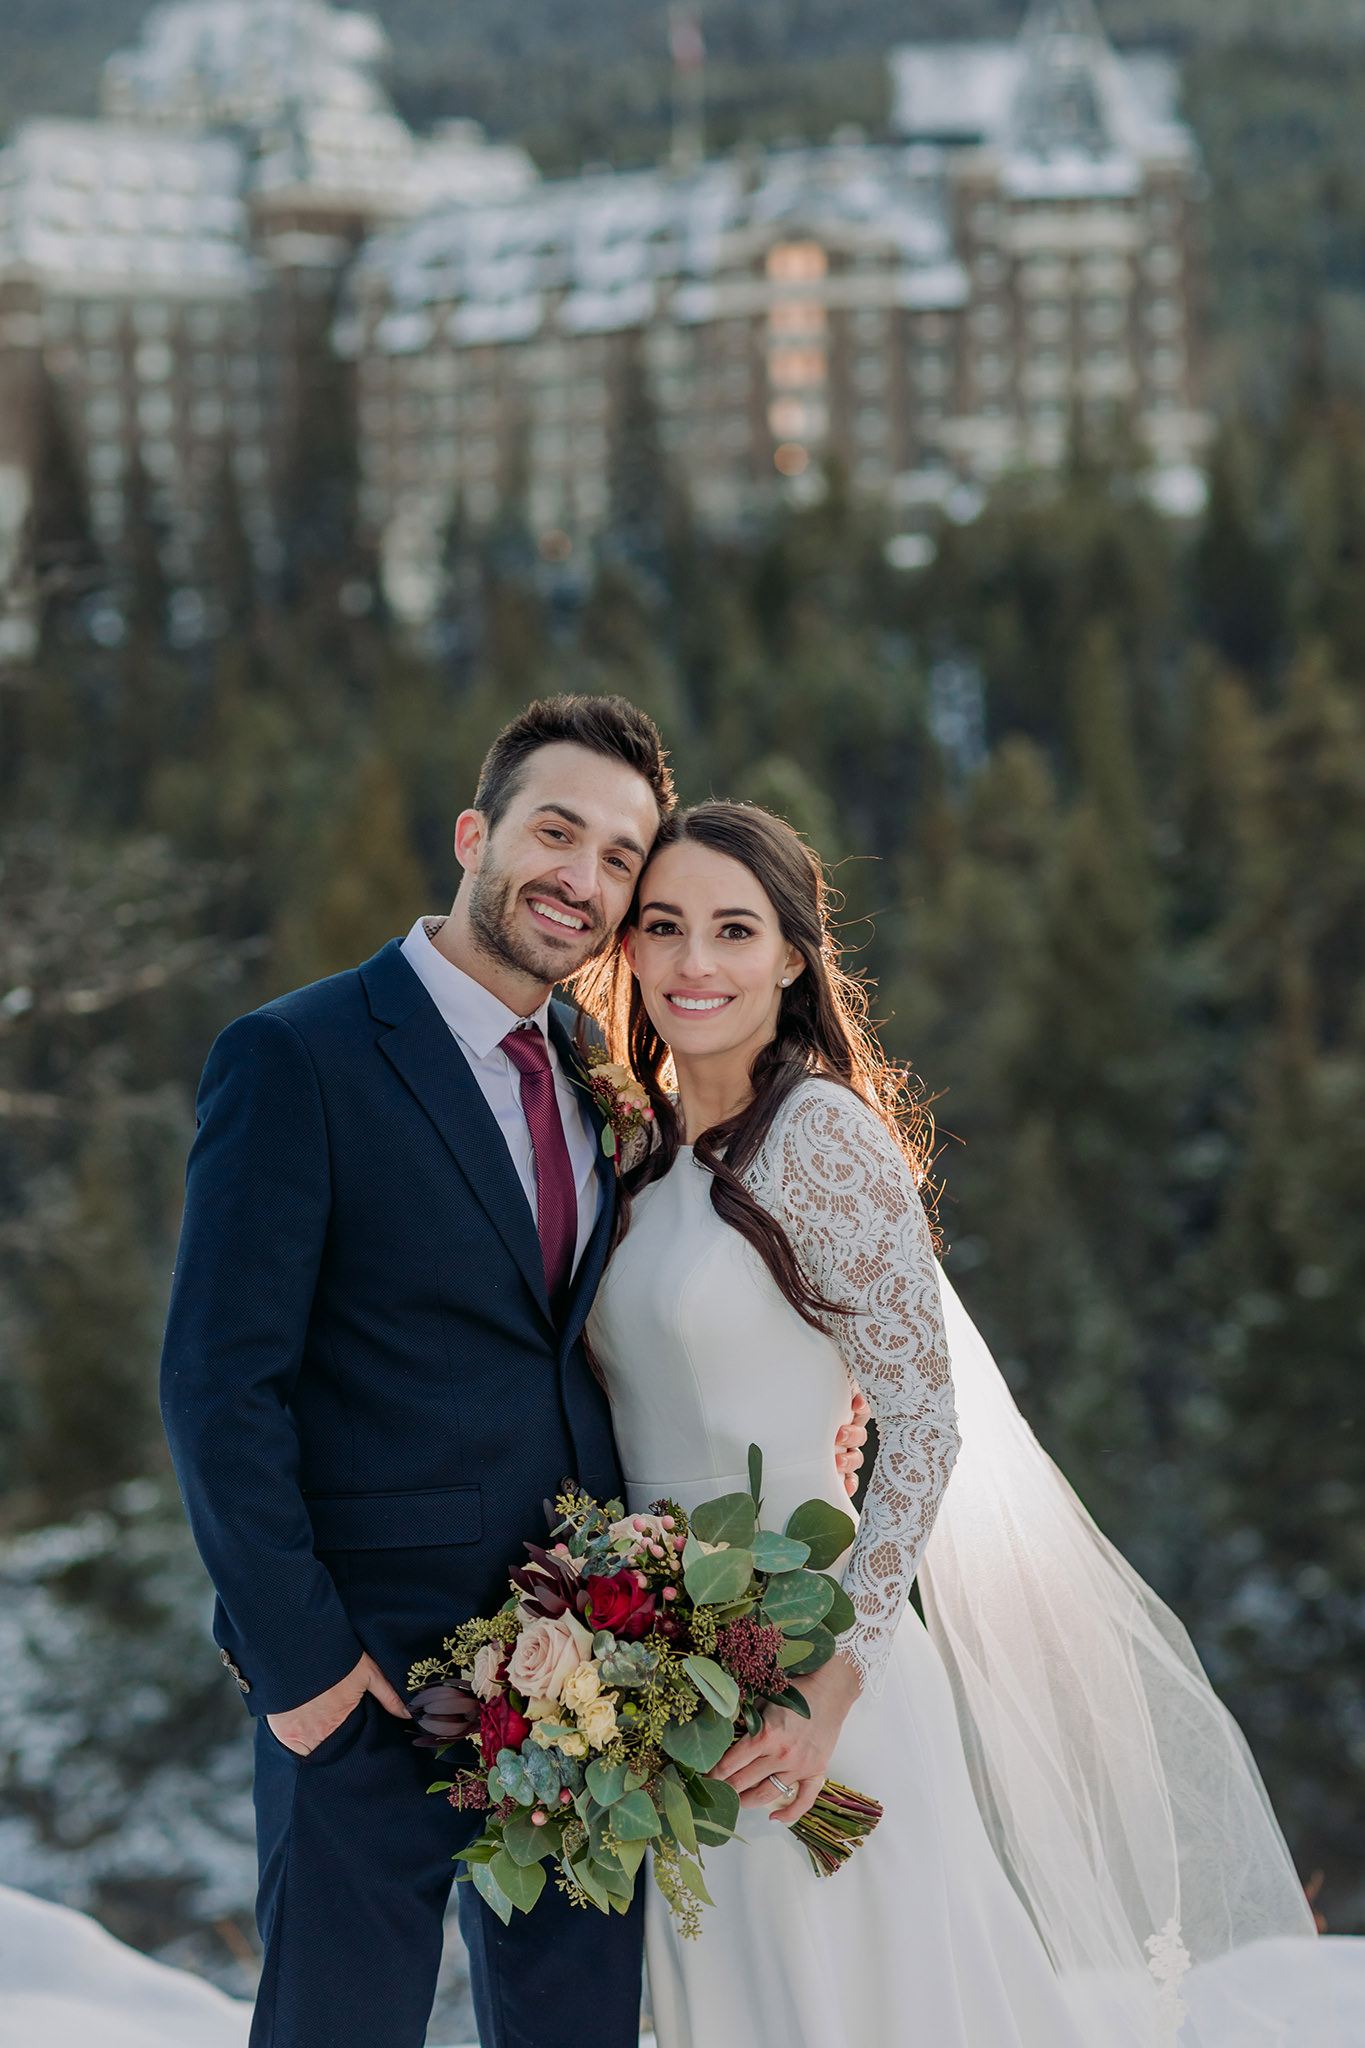 Banff winter wedding portraits at Surprise Corner in the mountains with Fairmont Banff Springs in the distance